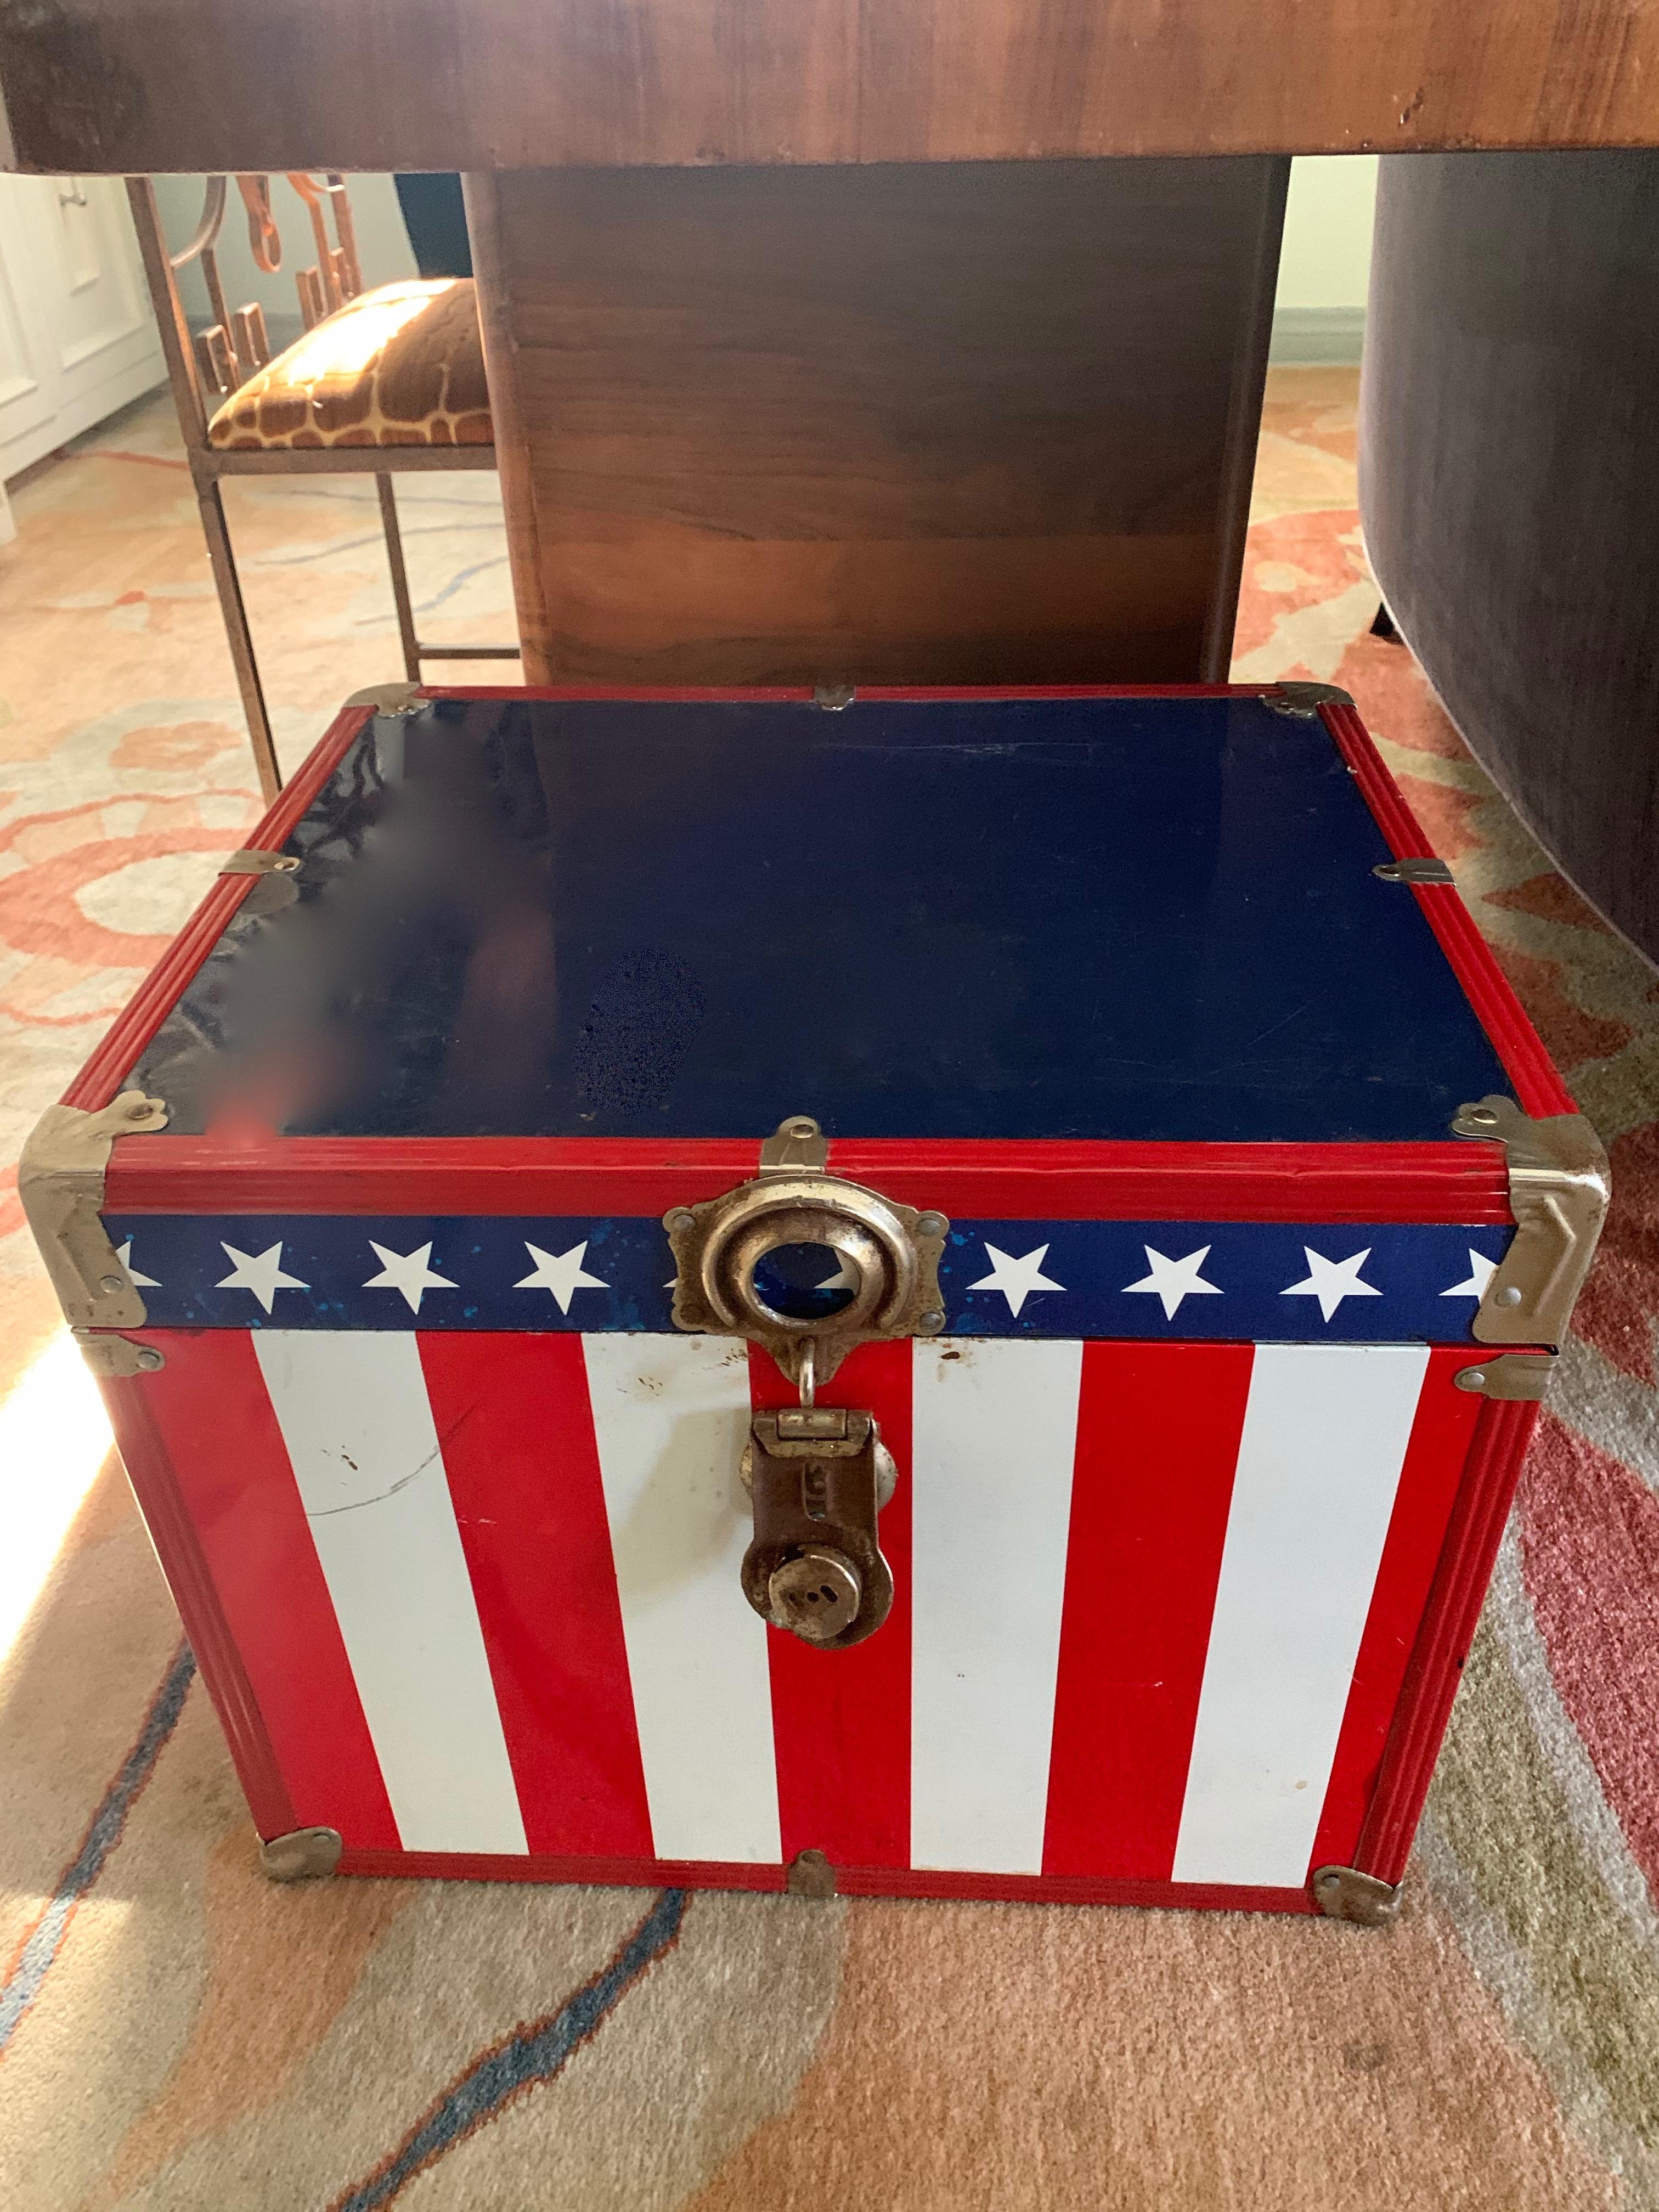 A wonderful Roadie or Evil Knievel stage box, ready for goggles to boots, from bags to books... reminiscent of.